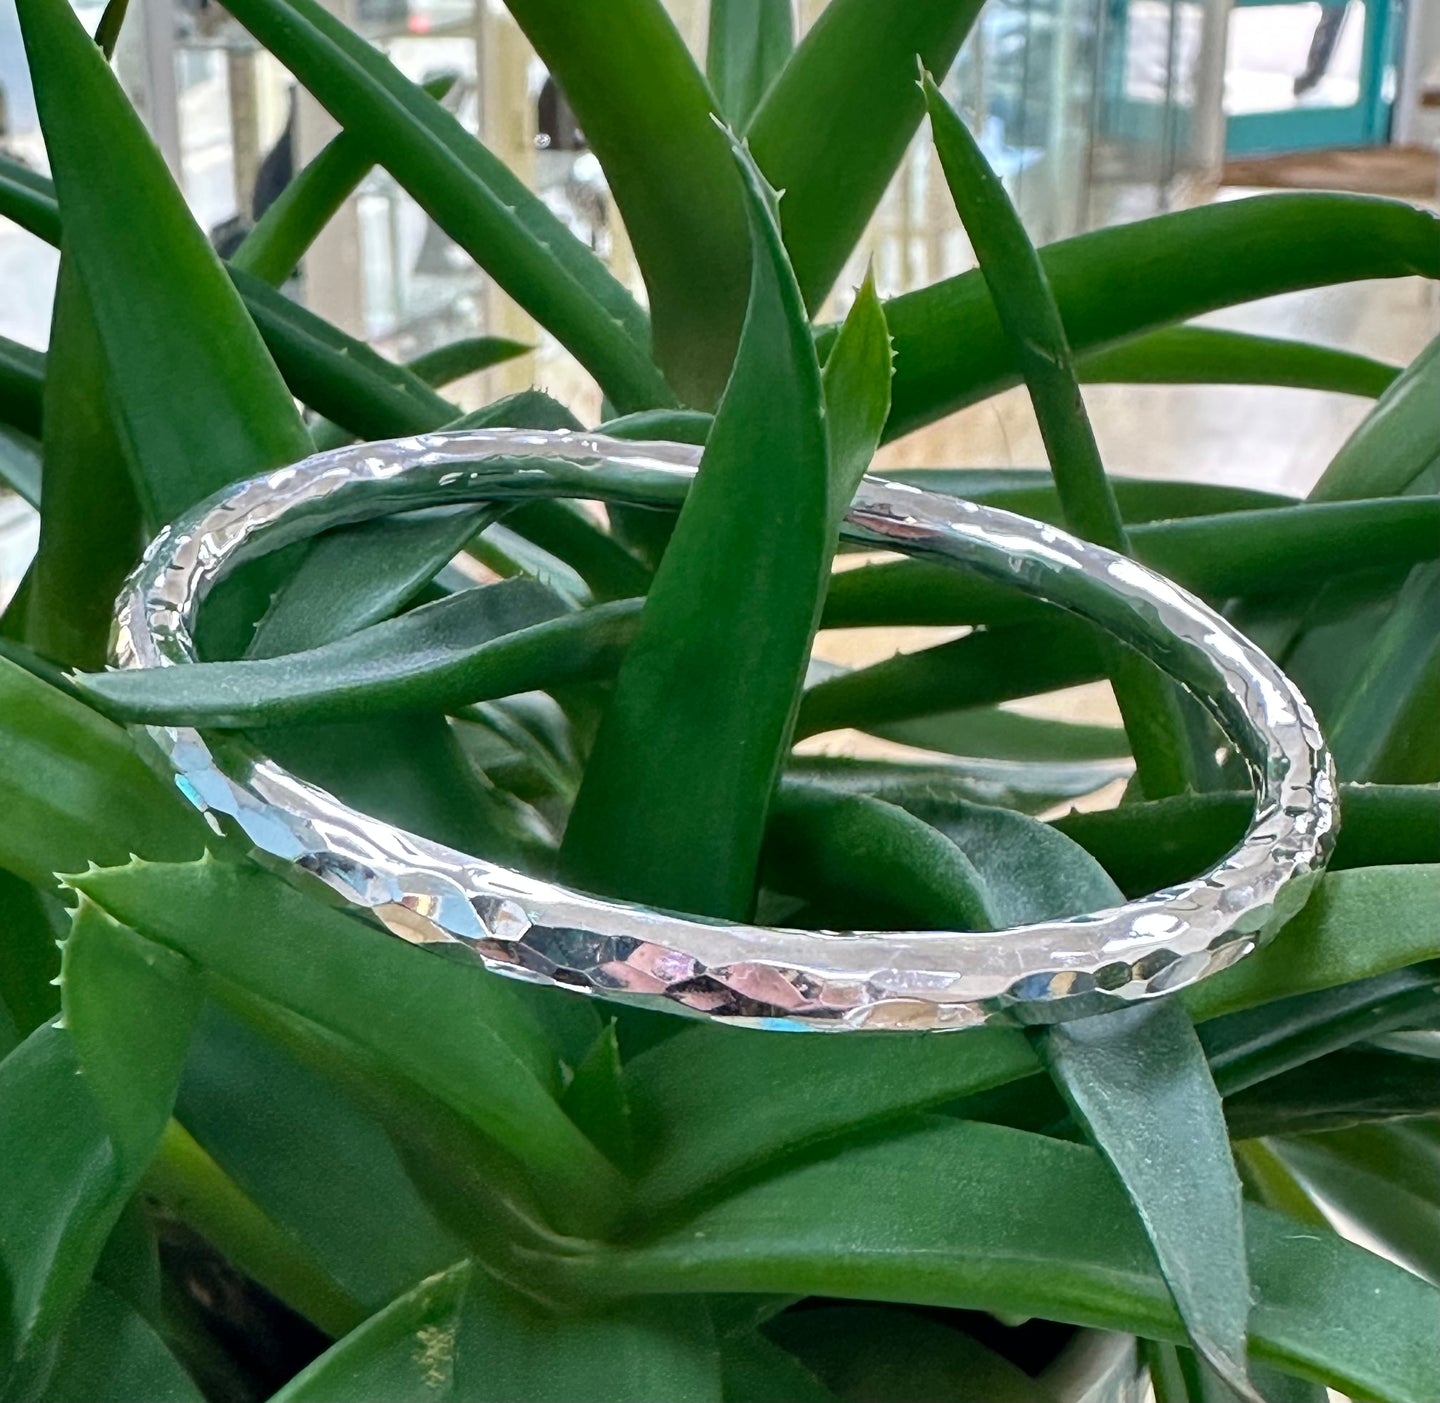 Handmade Sterling Silver Round Wire Hammered Bangle